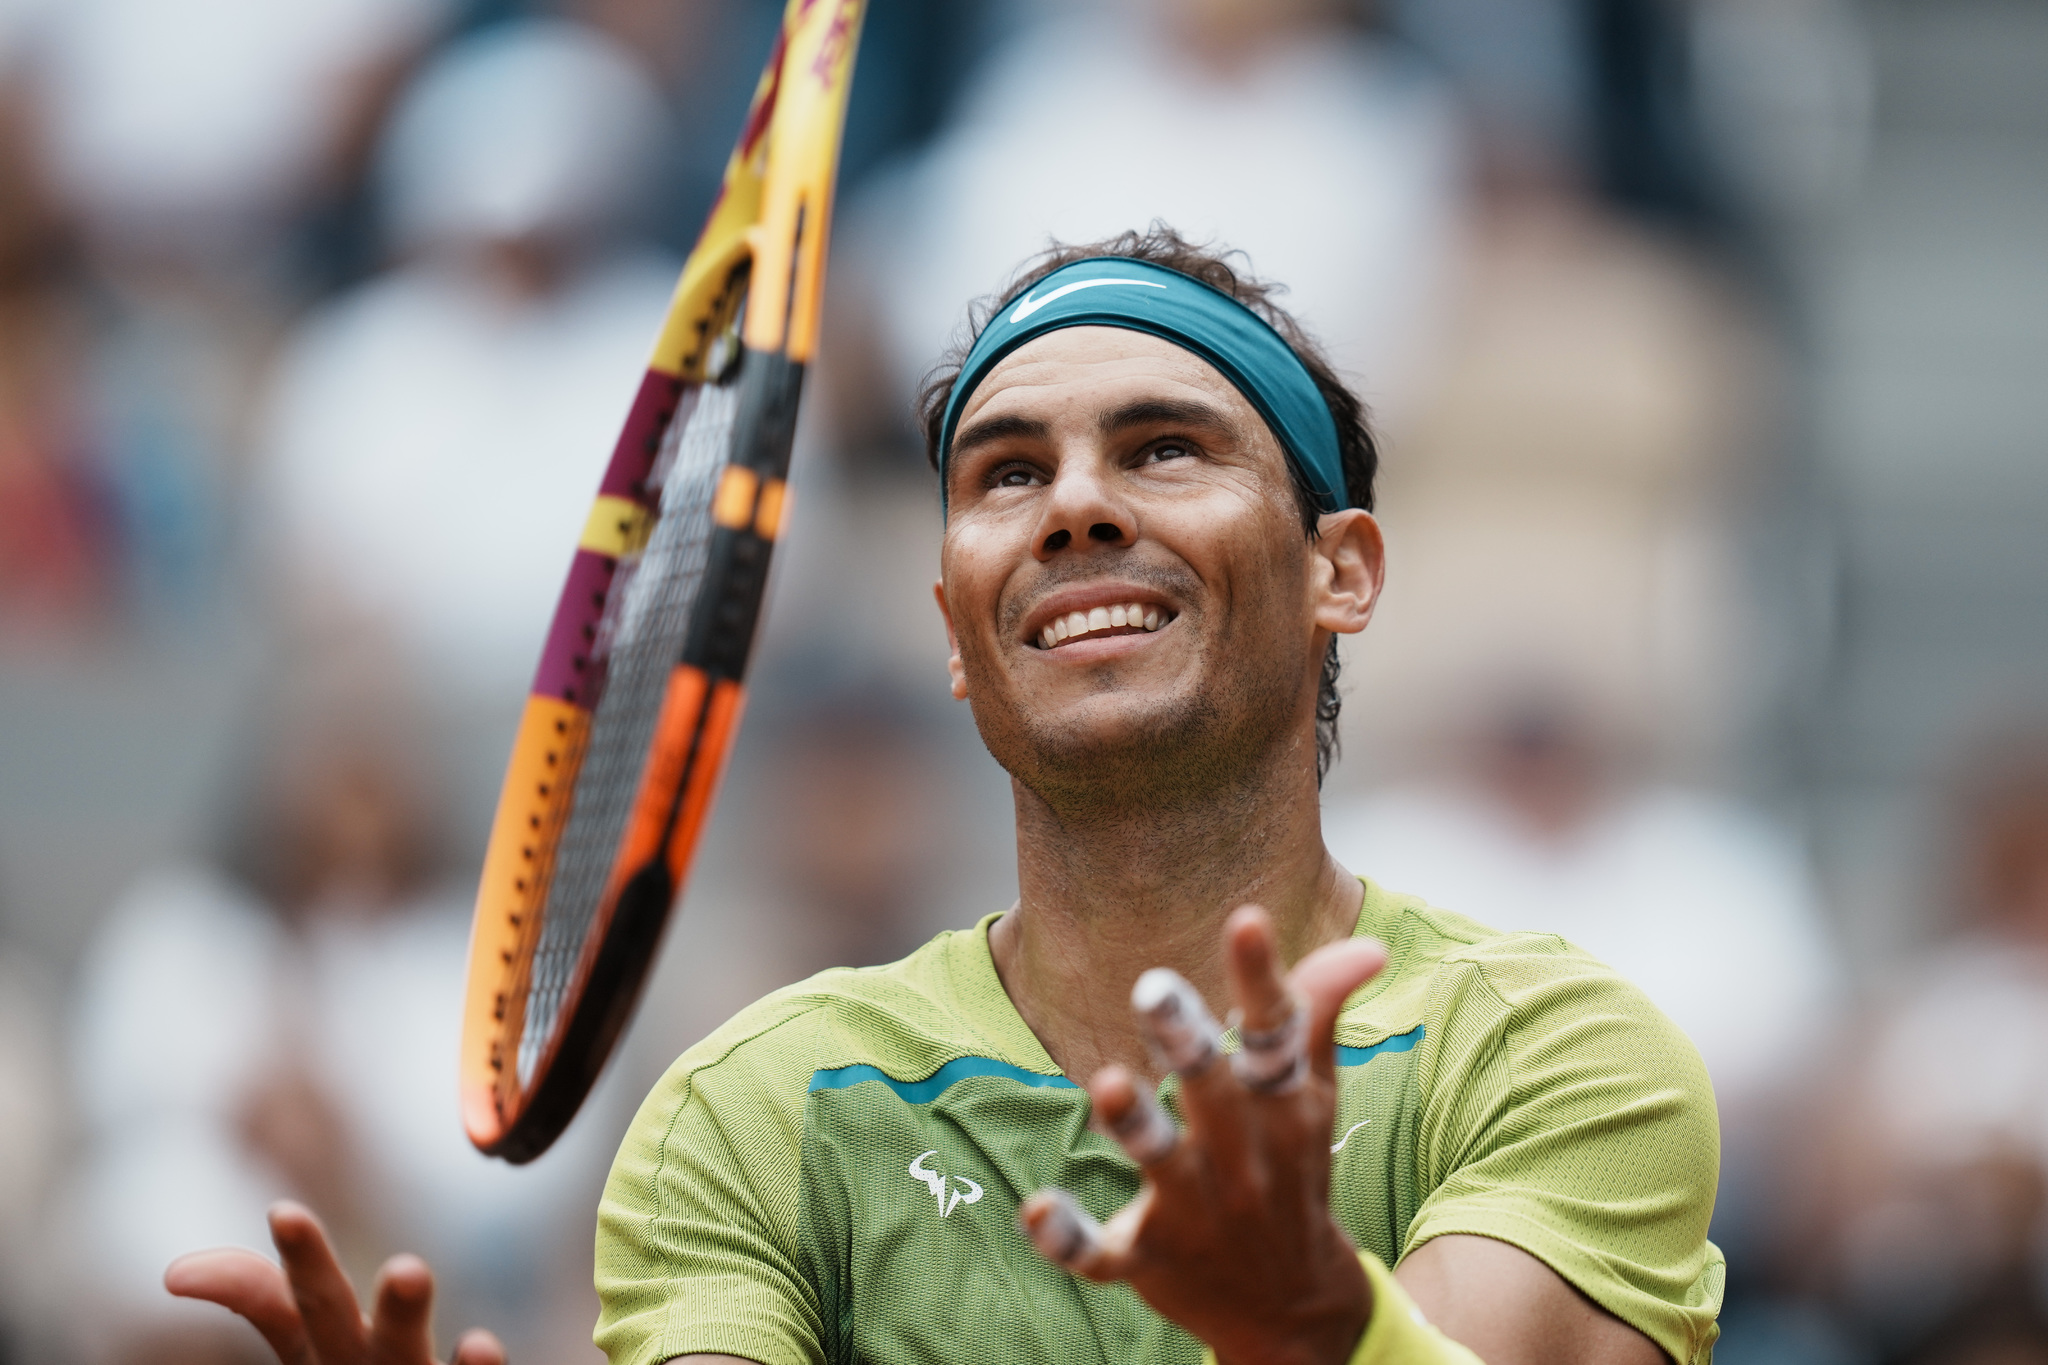 Spain's Rafael  lt;HIT gt;Nadal lt;/HIT gt; juggles with his racket during his first round match against Australia's Jordan Thompson at the French Open tennis tournament in Roland Garros stadium in Paris, France, Monday, May 23, 2022. (AP Photo/Thibault Camus)